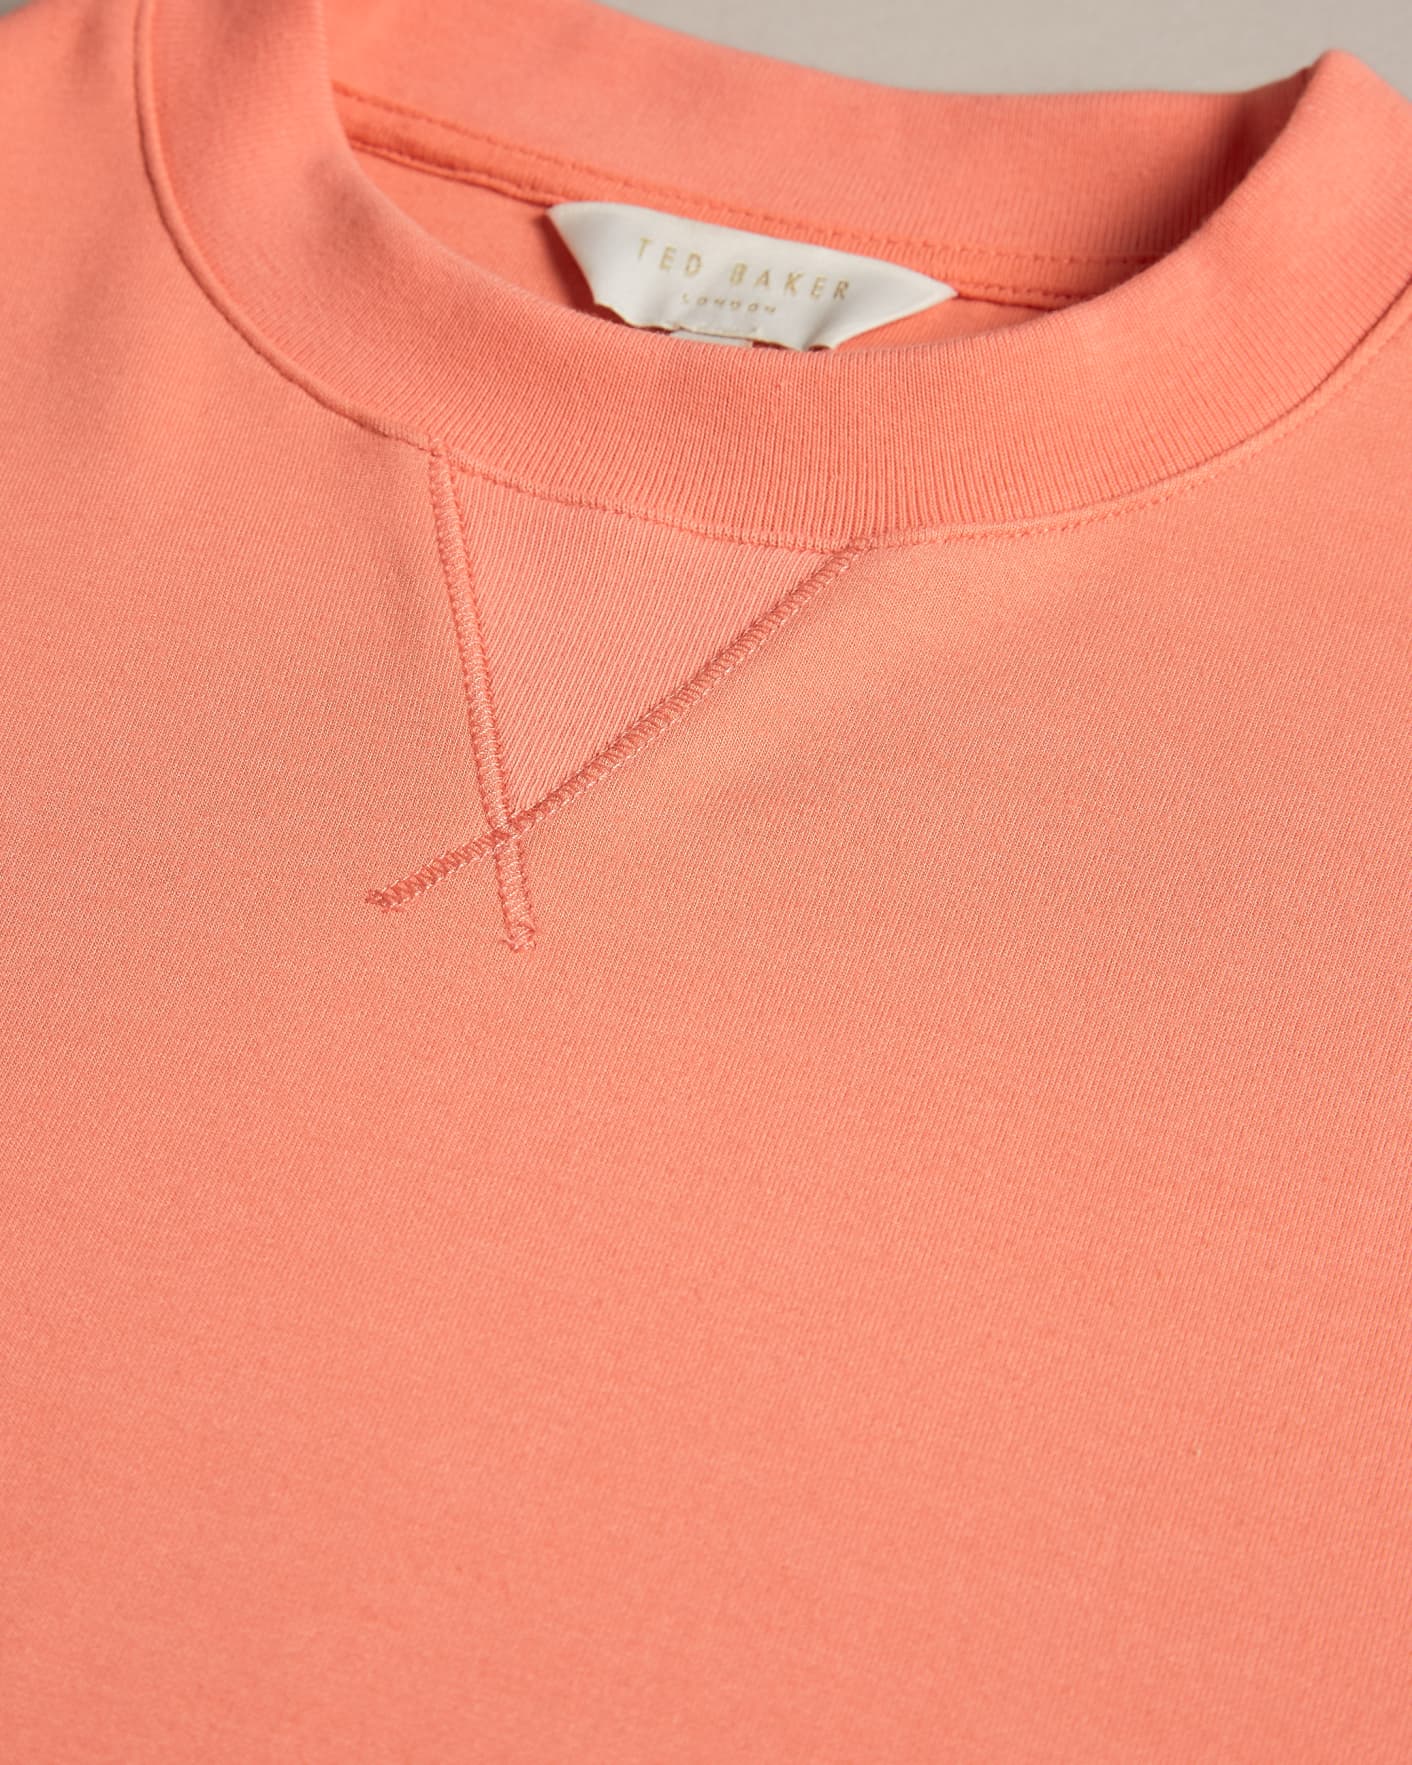 Coral Cropped Jumper With 3/4 Sleeve Ted Baker